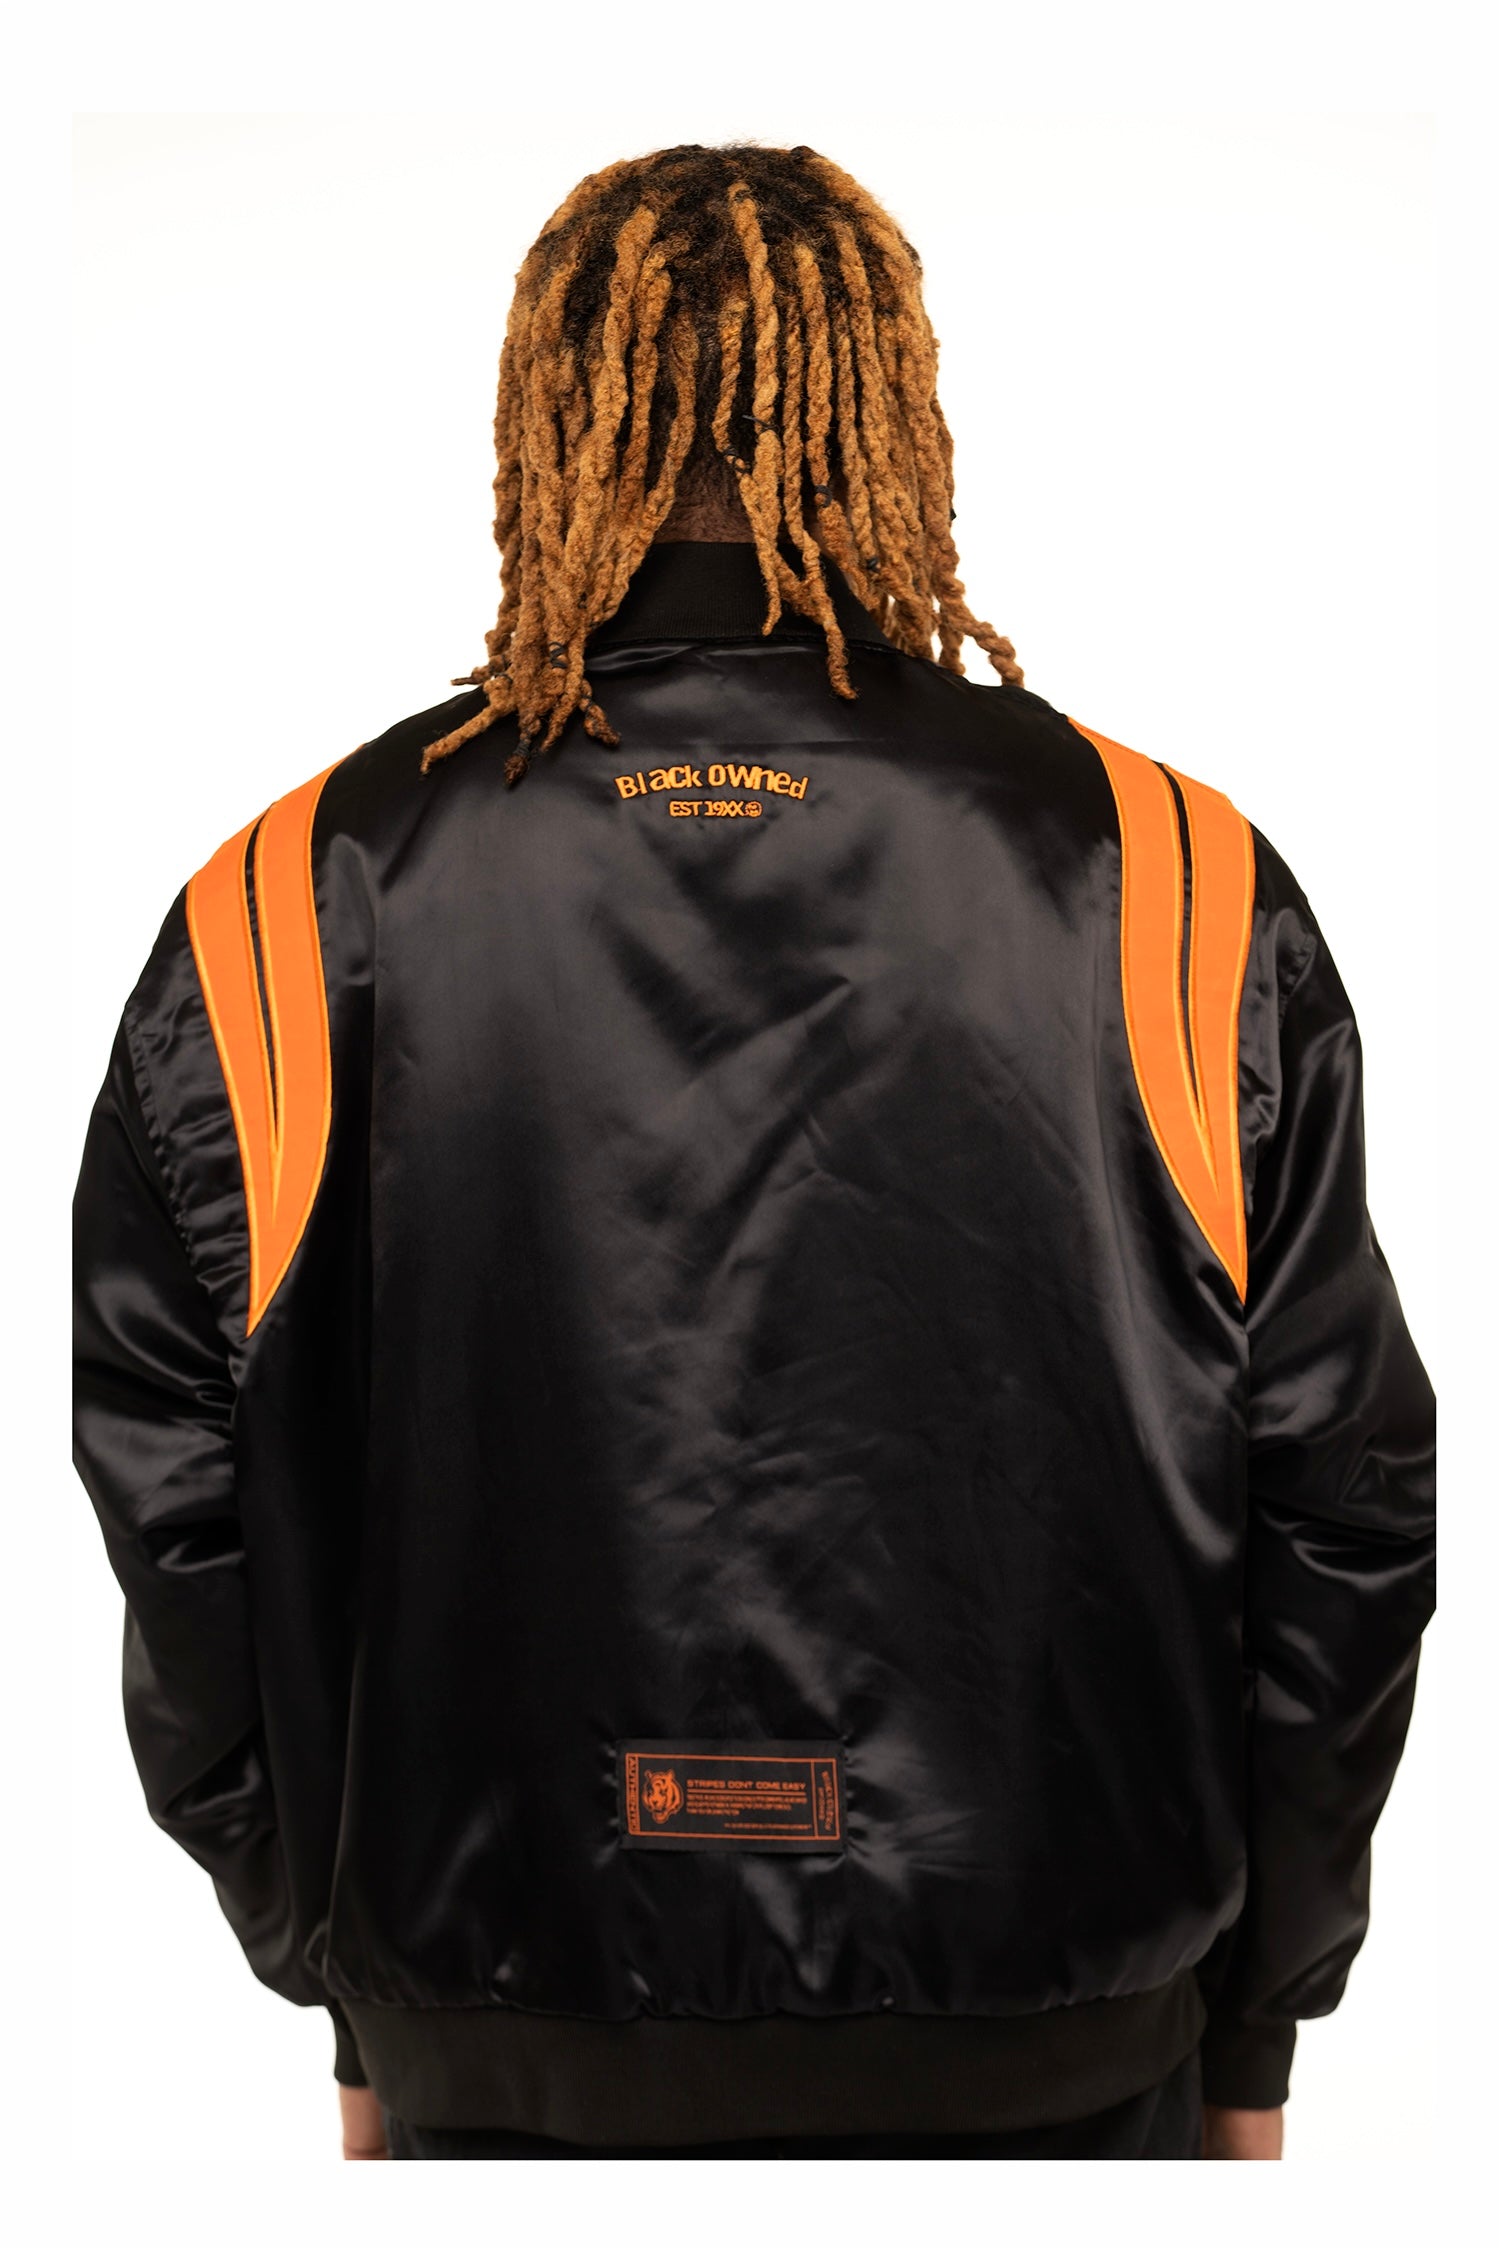 Stripes Dont Come Easy II Satin Reversible Bomber Jacket – BlaCk OWned  OuterWear